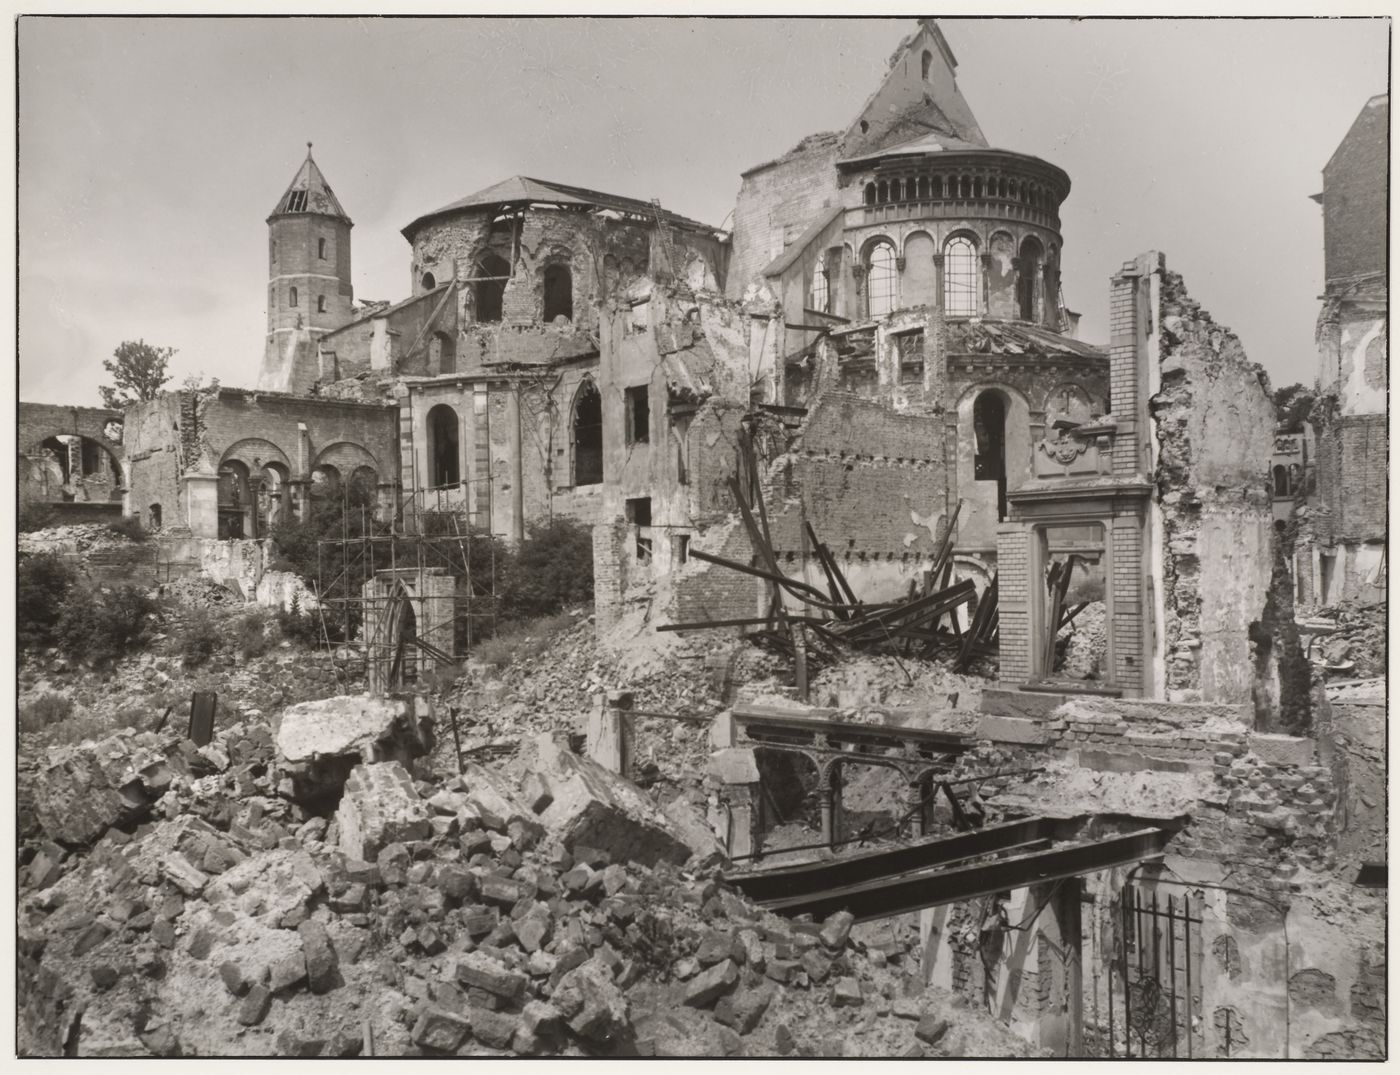 View of destruction to church and buildings, Cologne, Germany